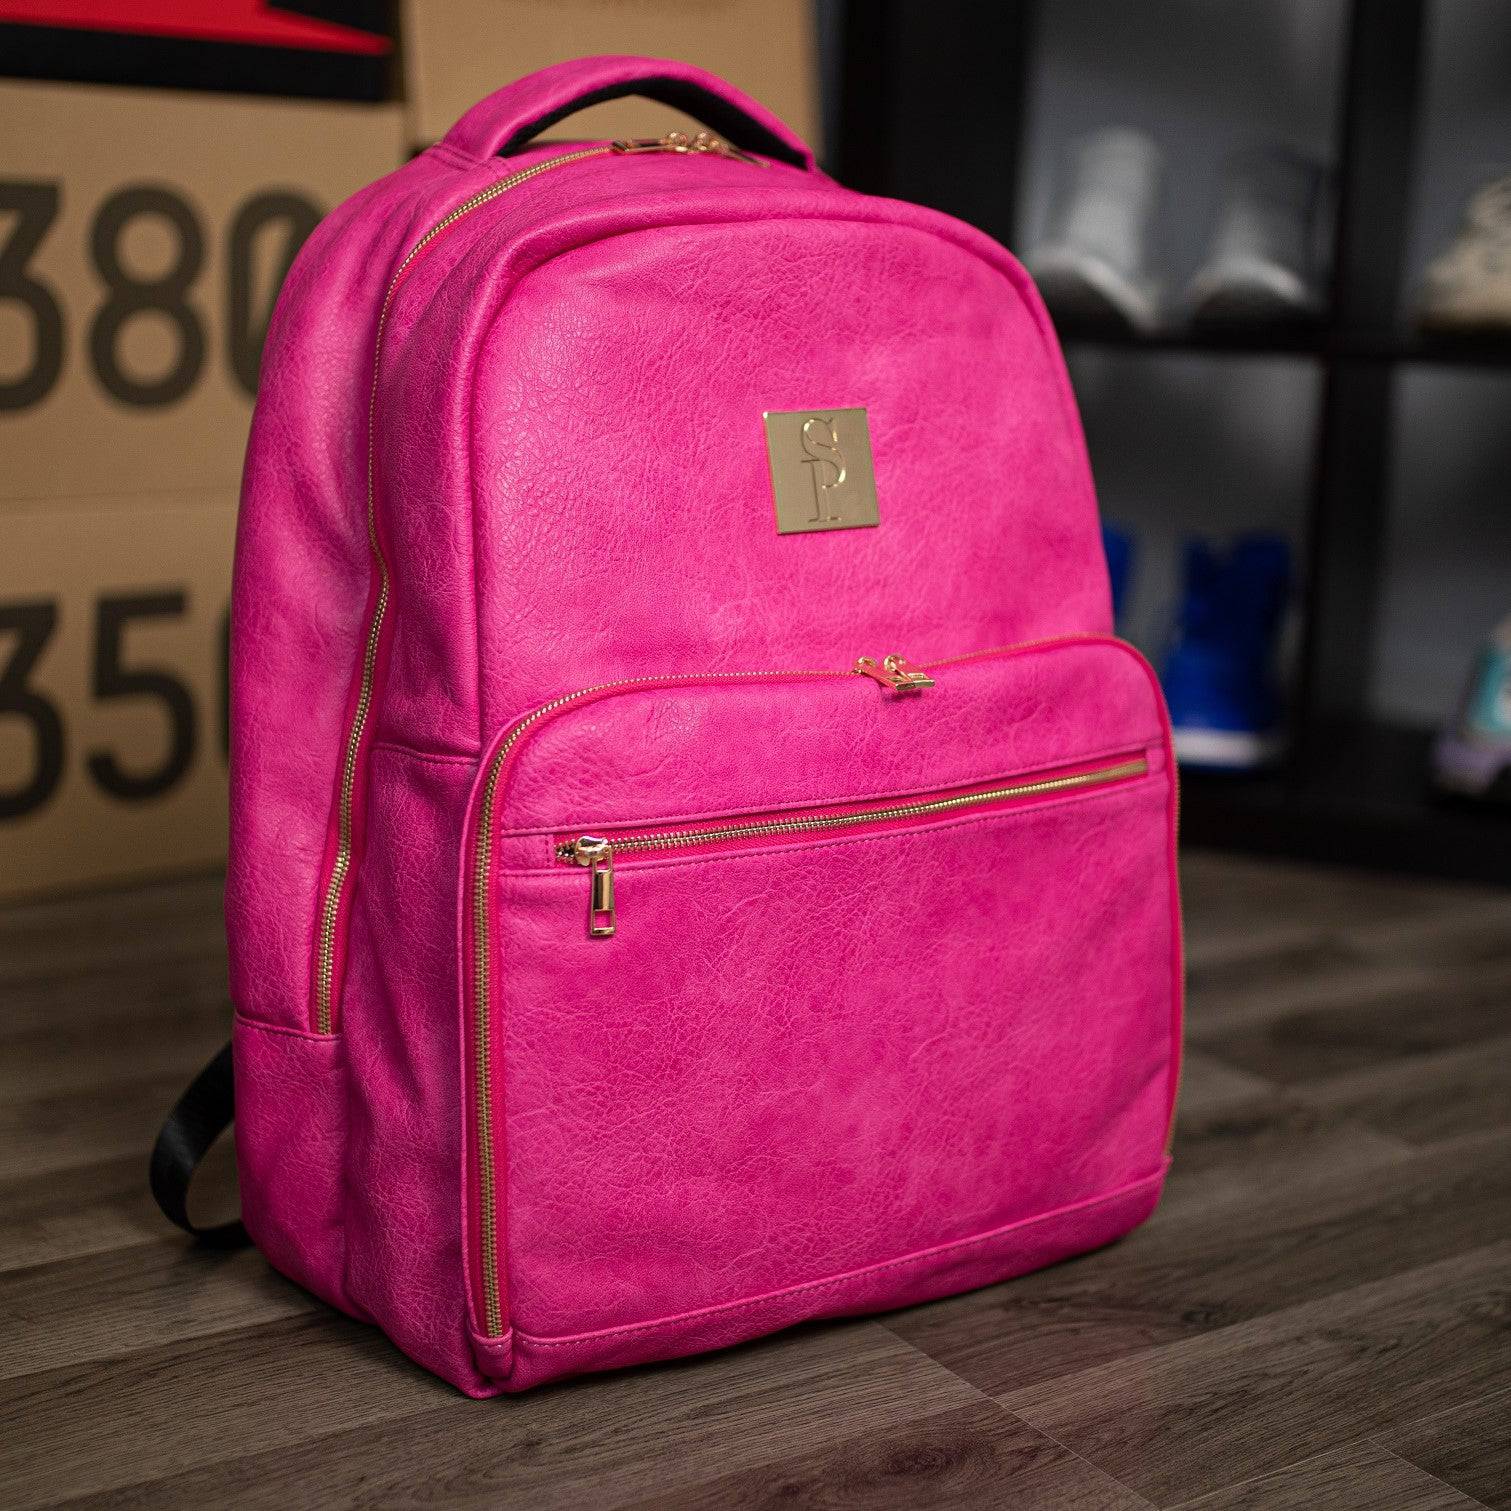 Leather Medium Duffle Bag Pink - Linden Is Enough